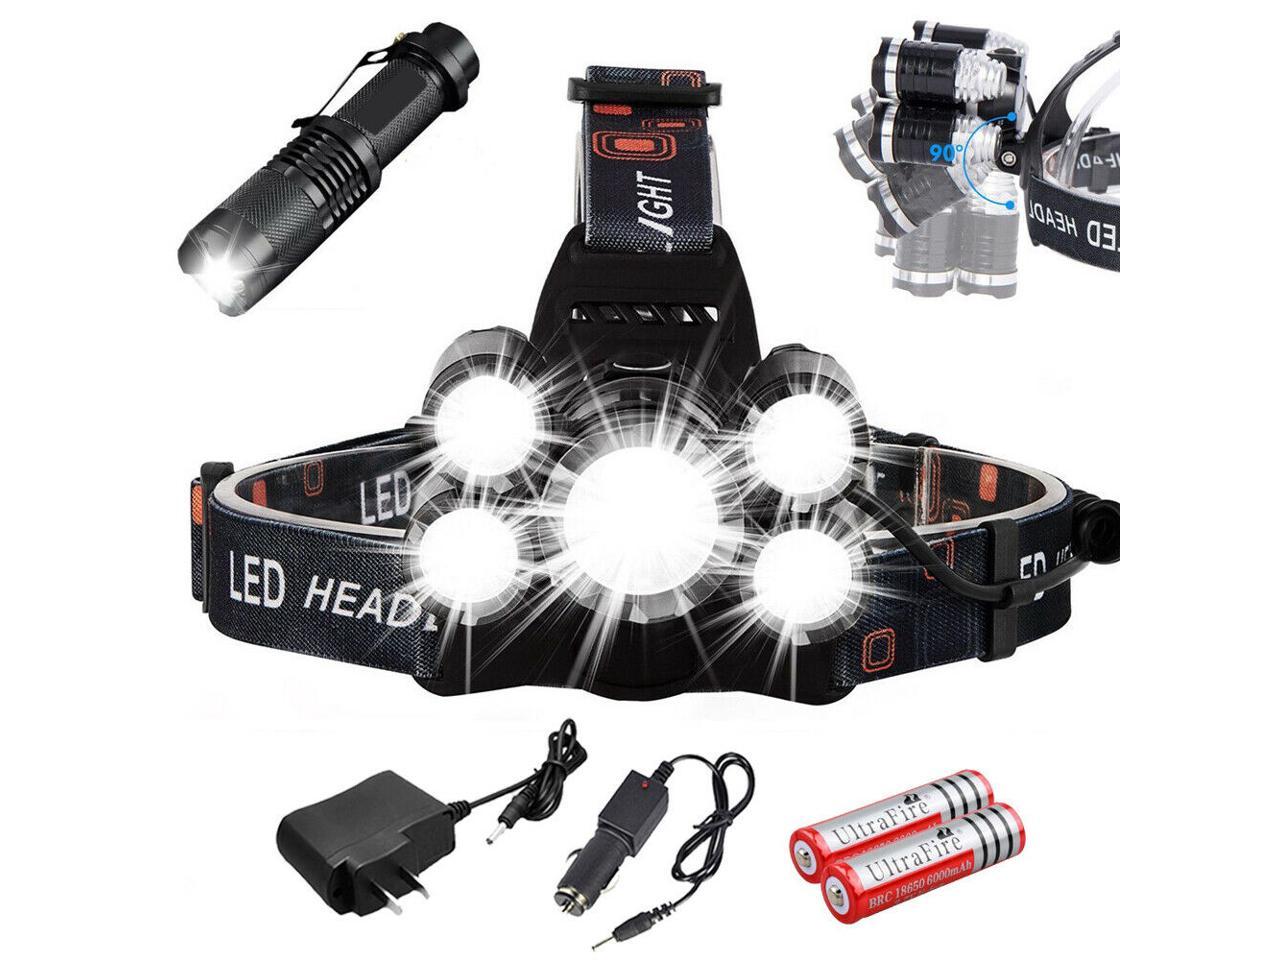 90000LM LM 5 Head XM-L T6 LED Rechargeable Headlamp Headlight Travel Head Torch